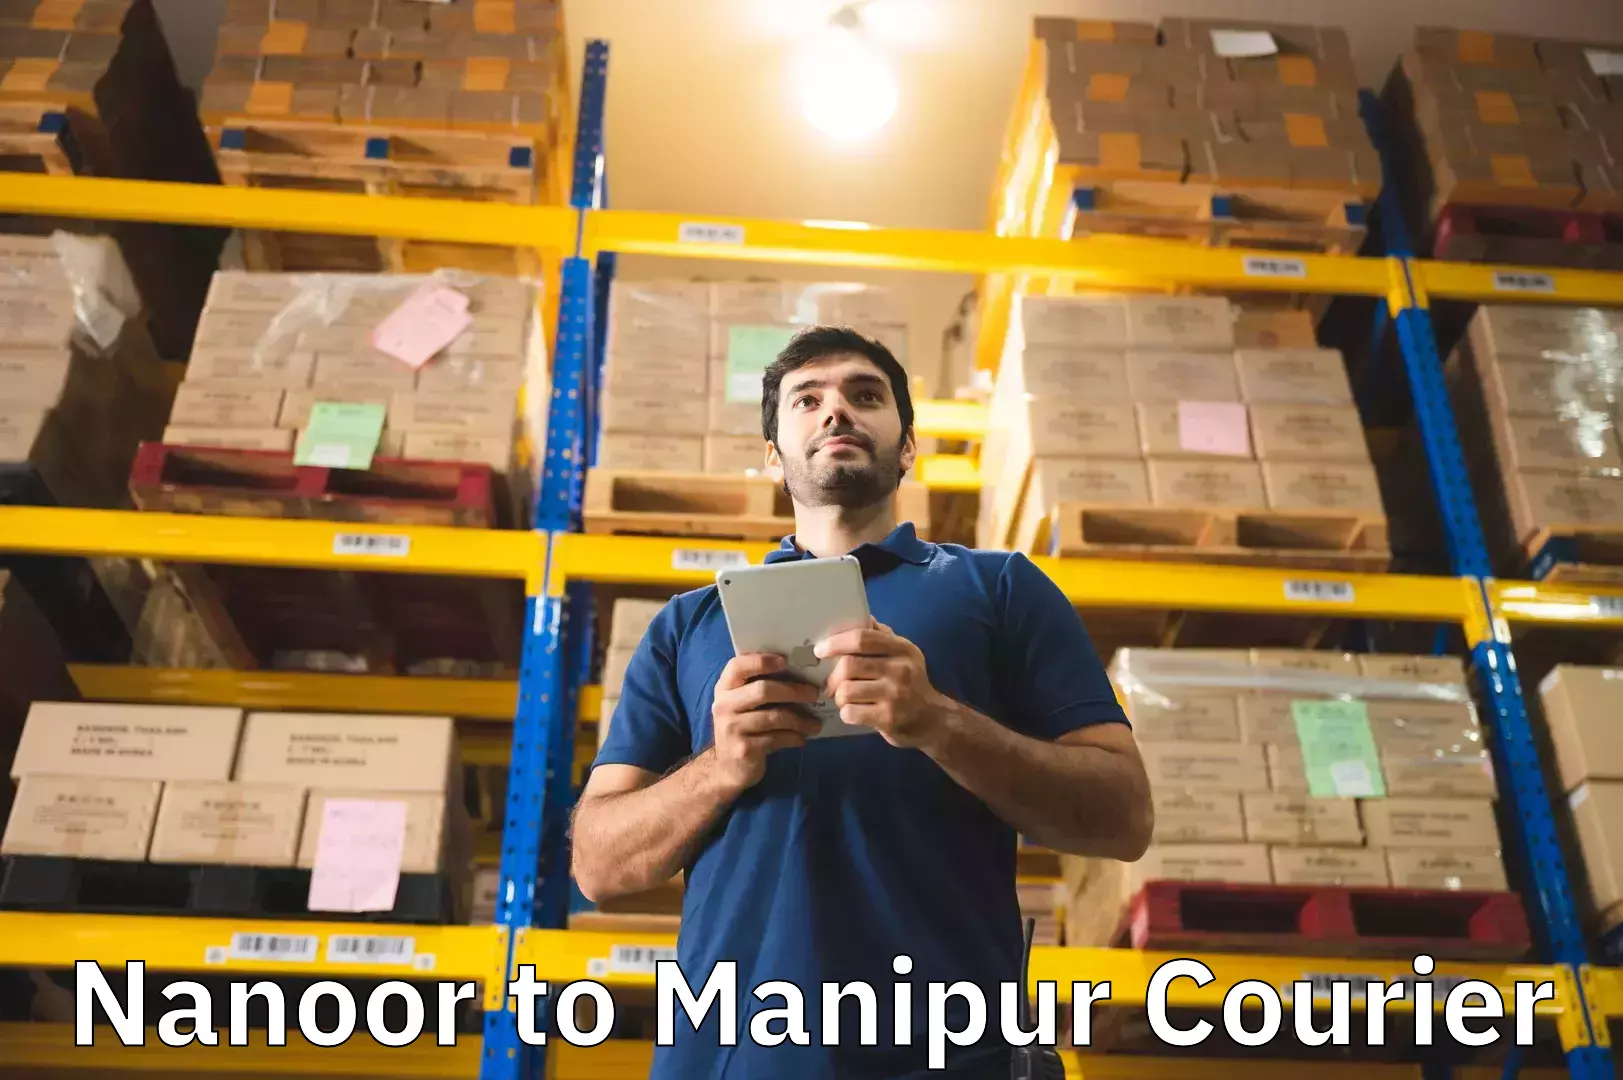 Luggage transport consultancy Nanoor to Manipur